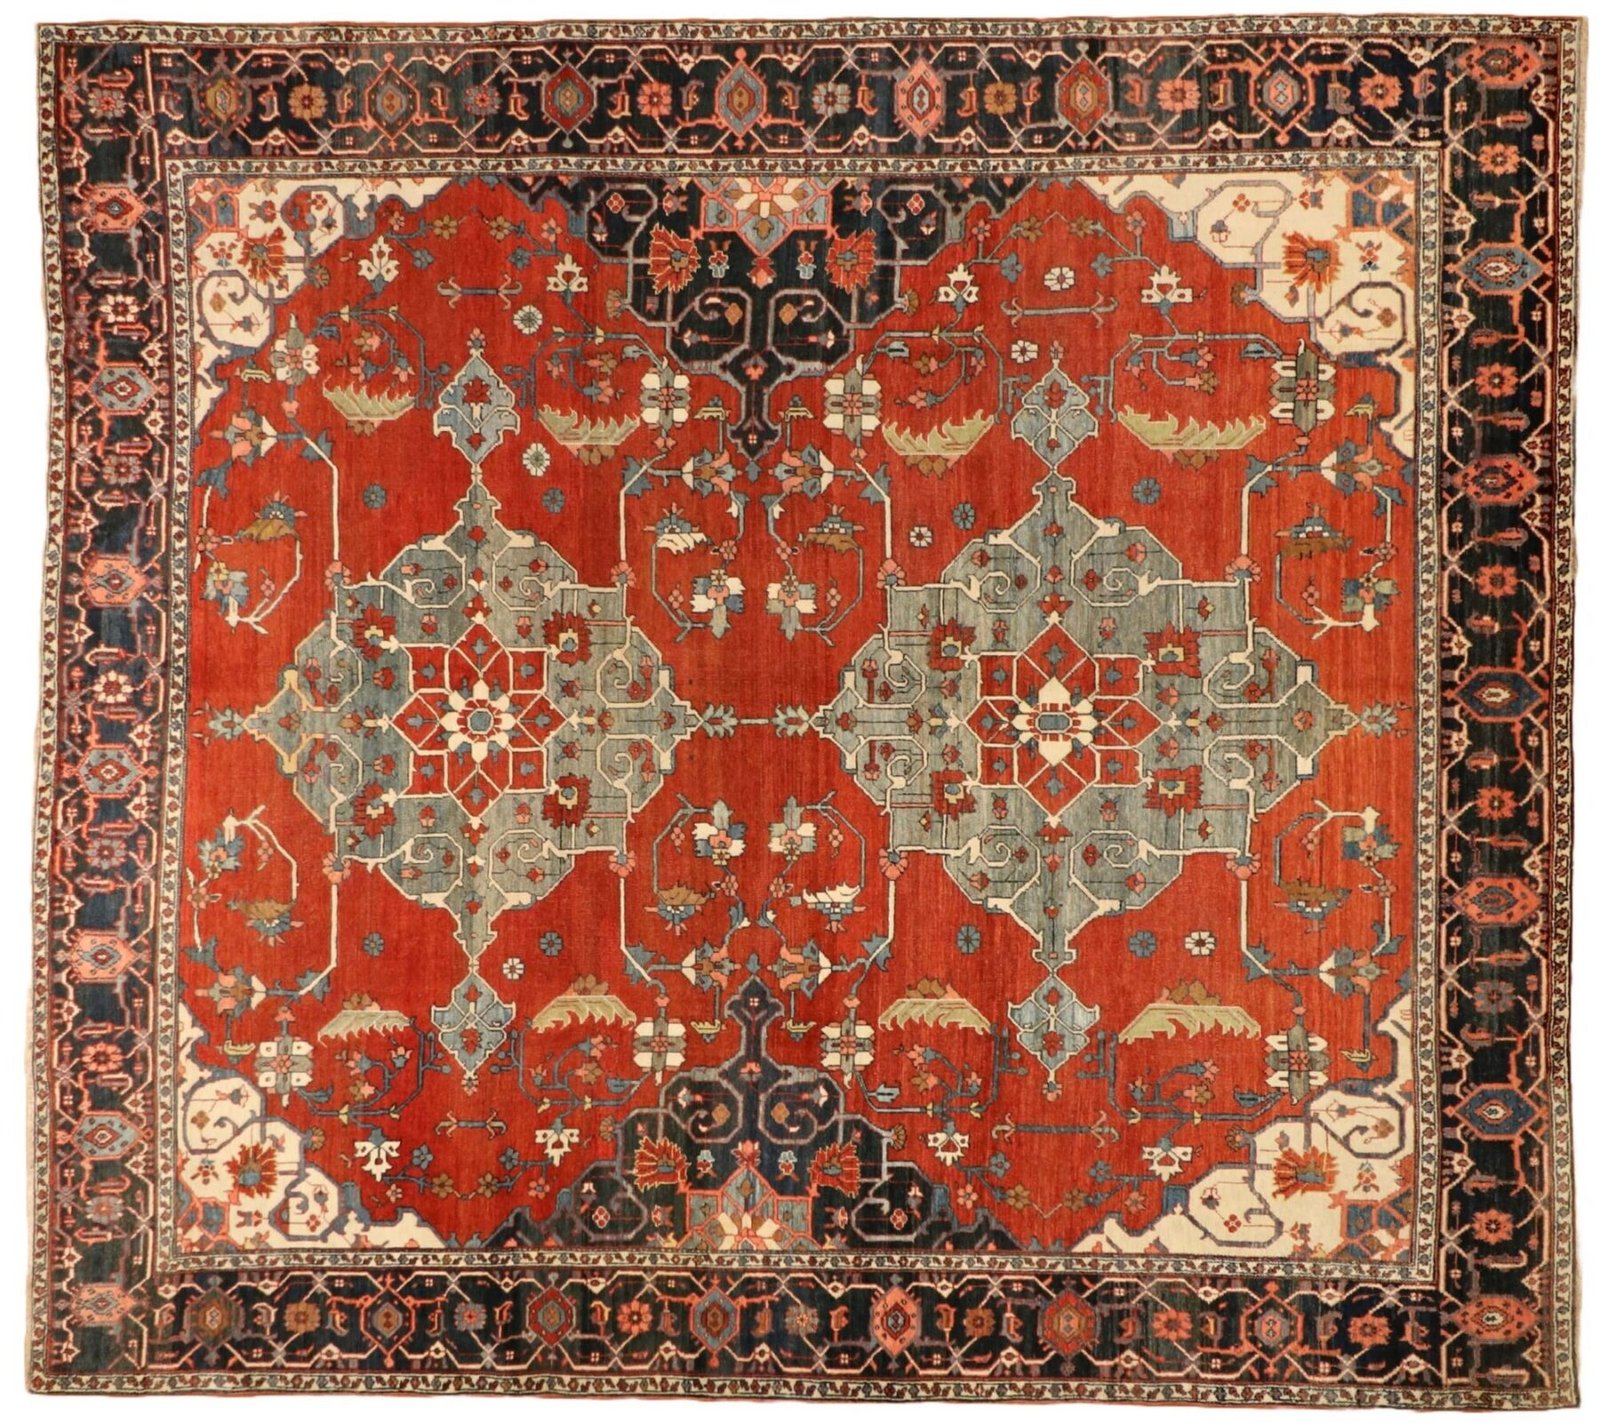 Rug from our Persian Rug Gallery in Fort Lauderdale